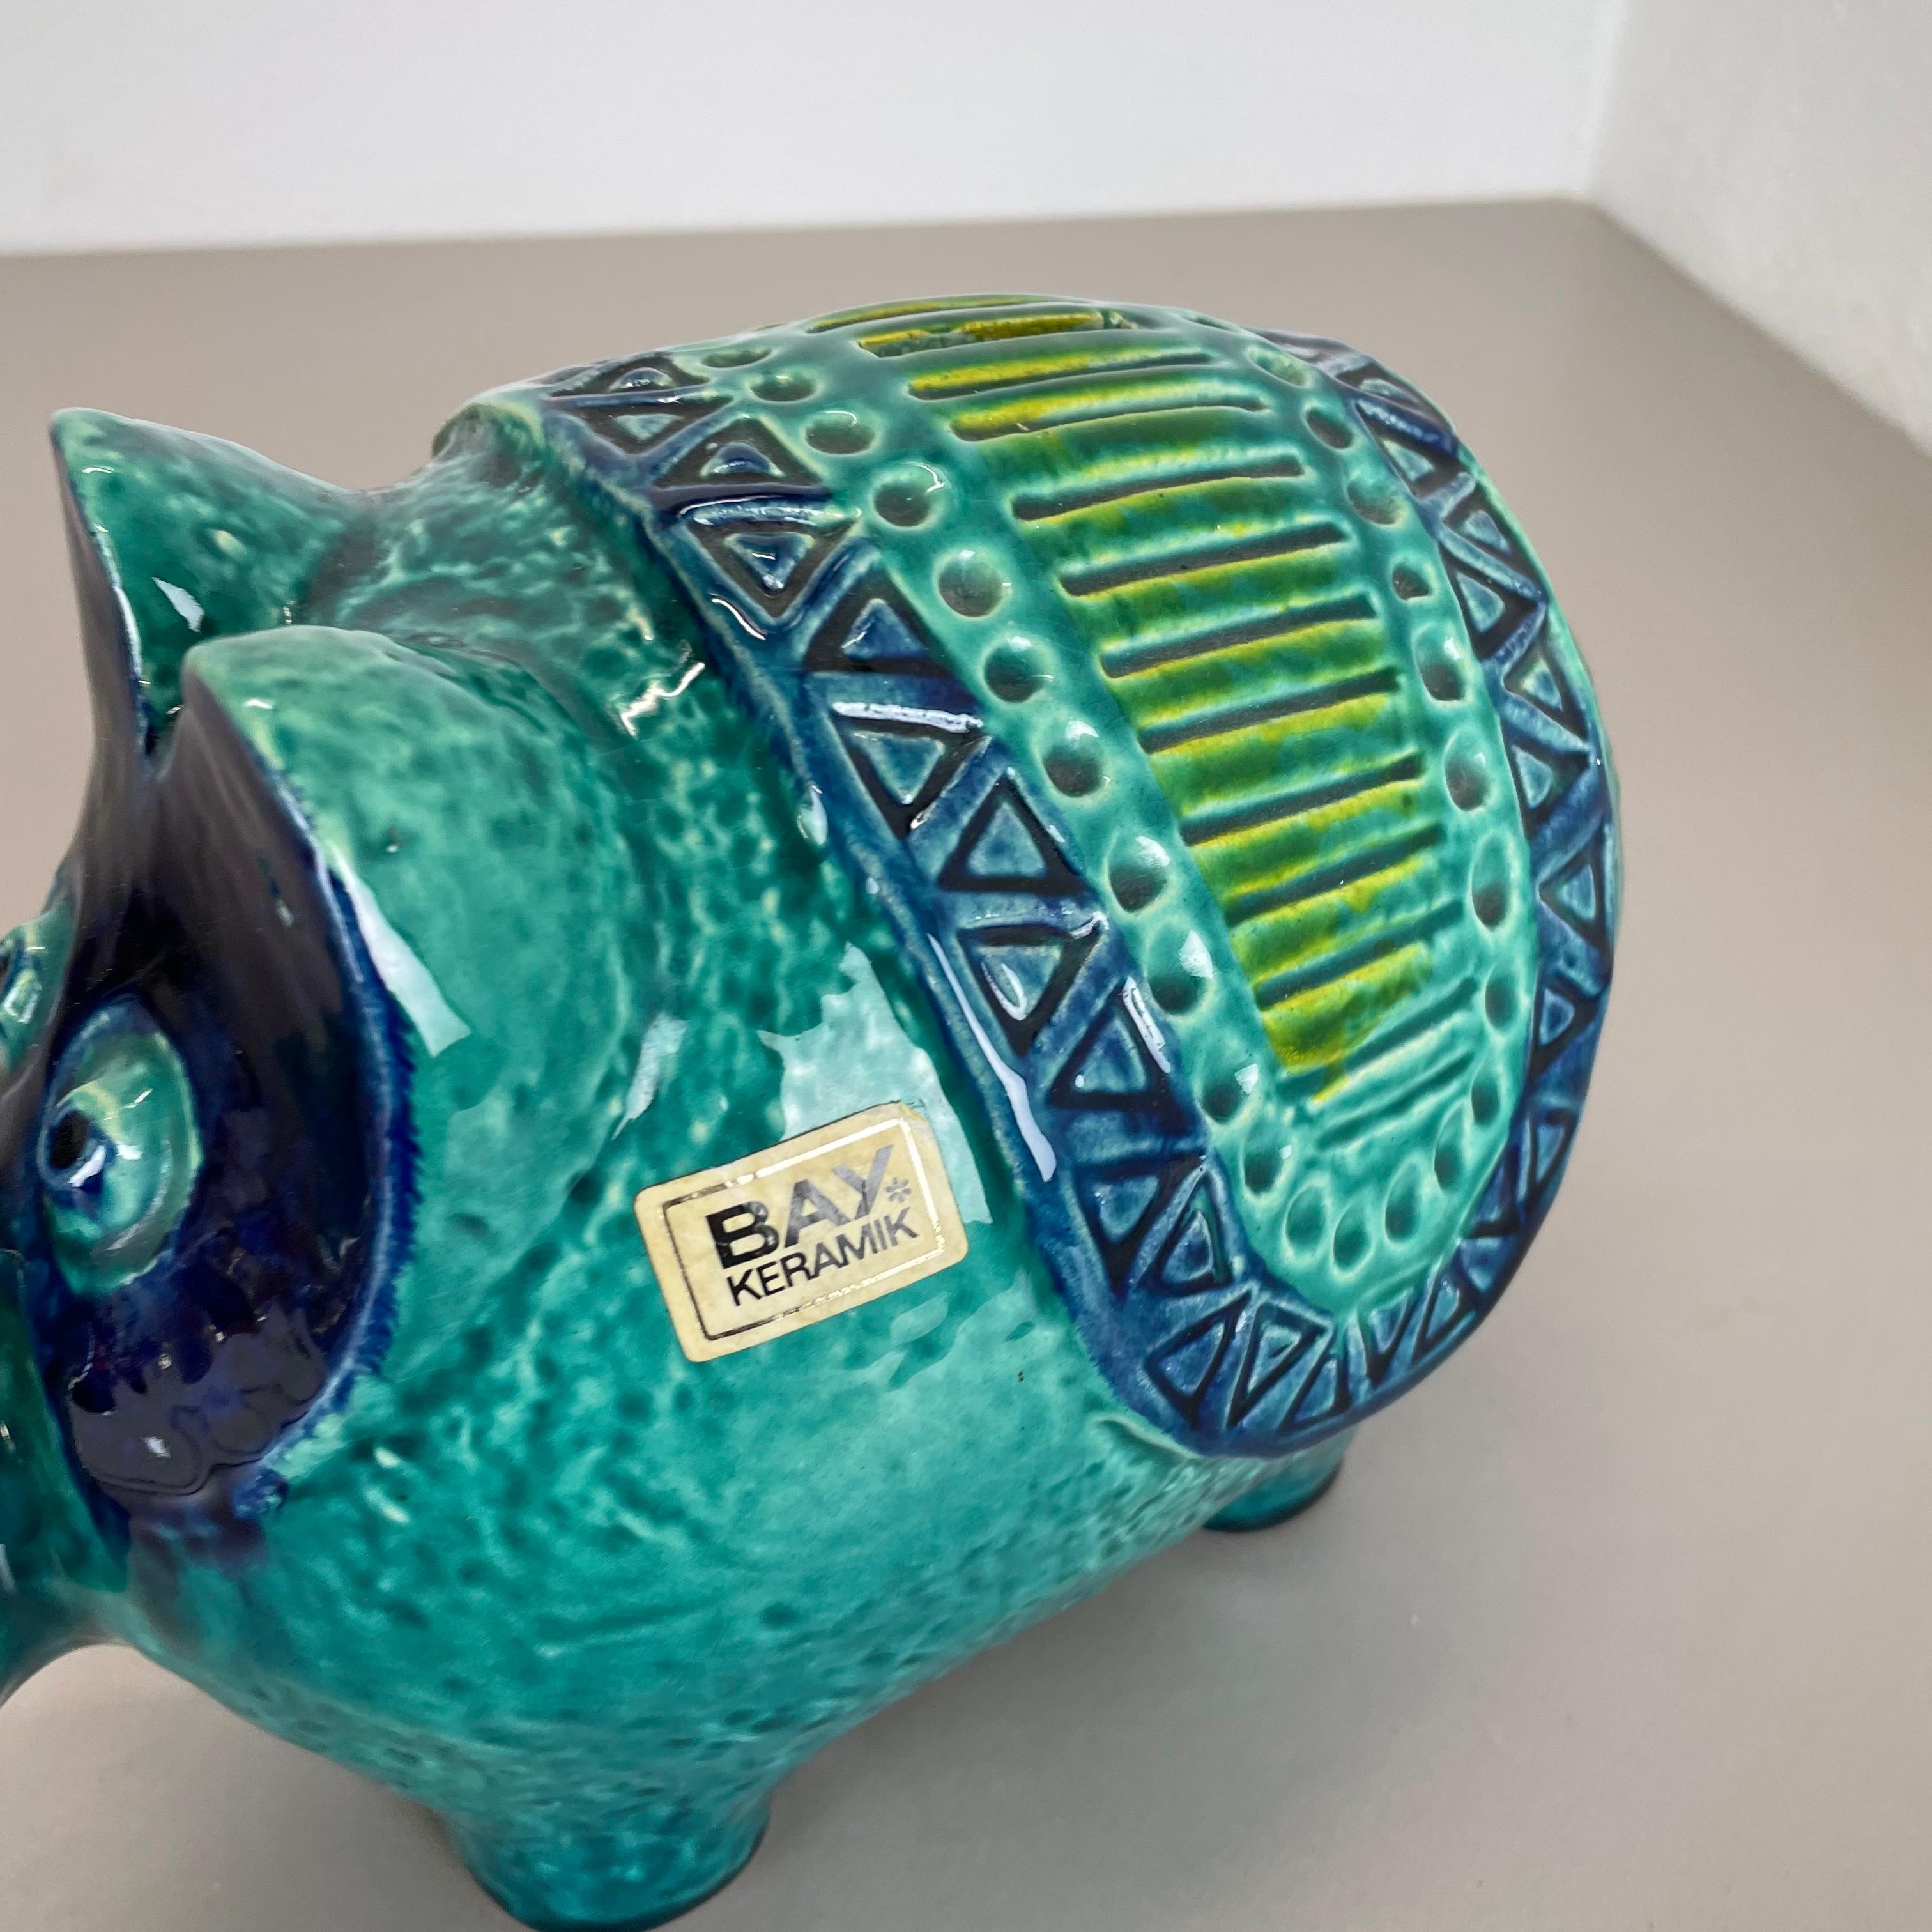 Colorful Fat Lava Pottery Swine Money Box Object by Bay Ceramics, Germany, 1970s For Sale 2